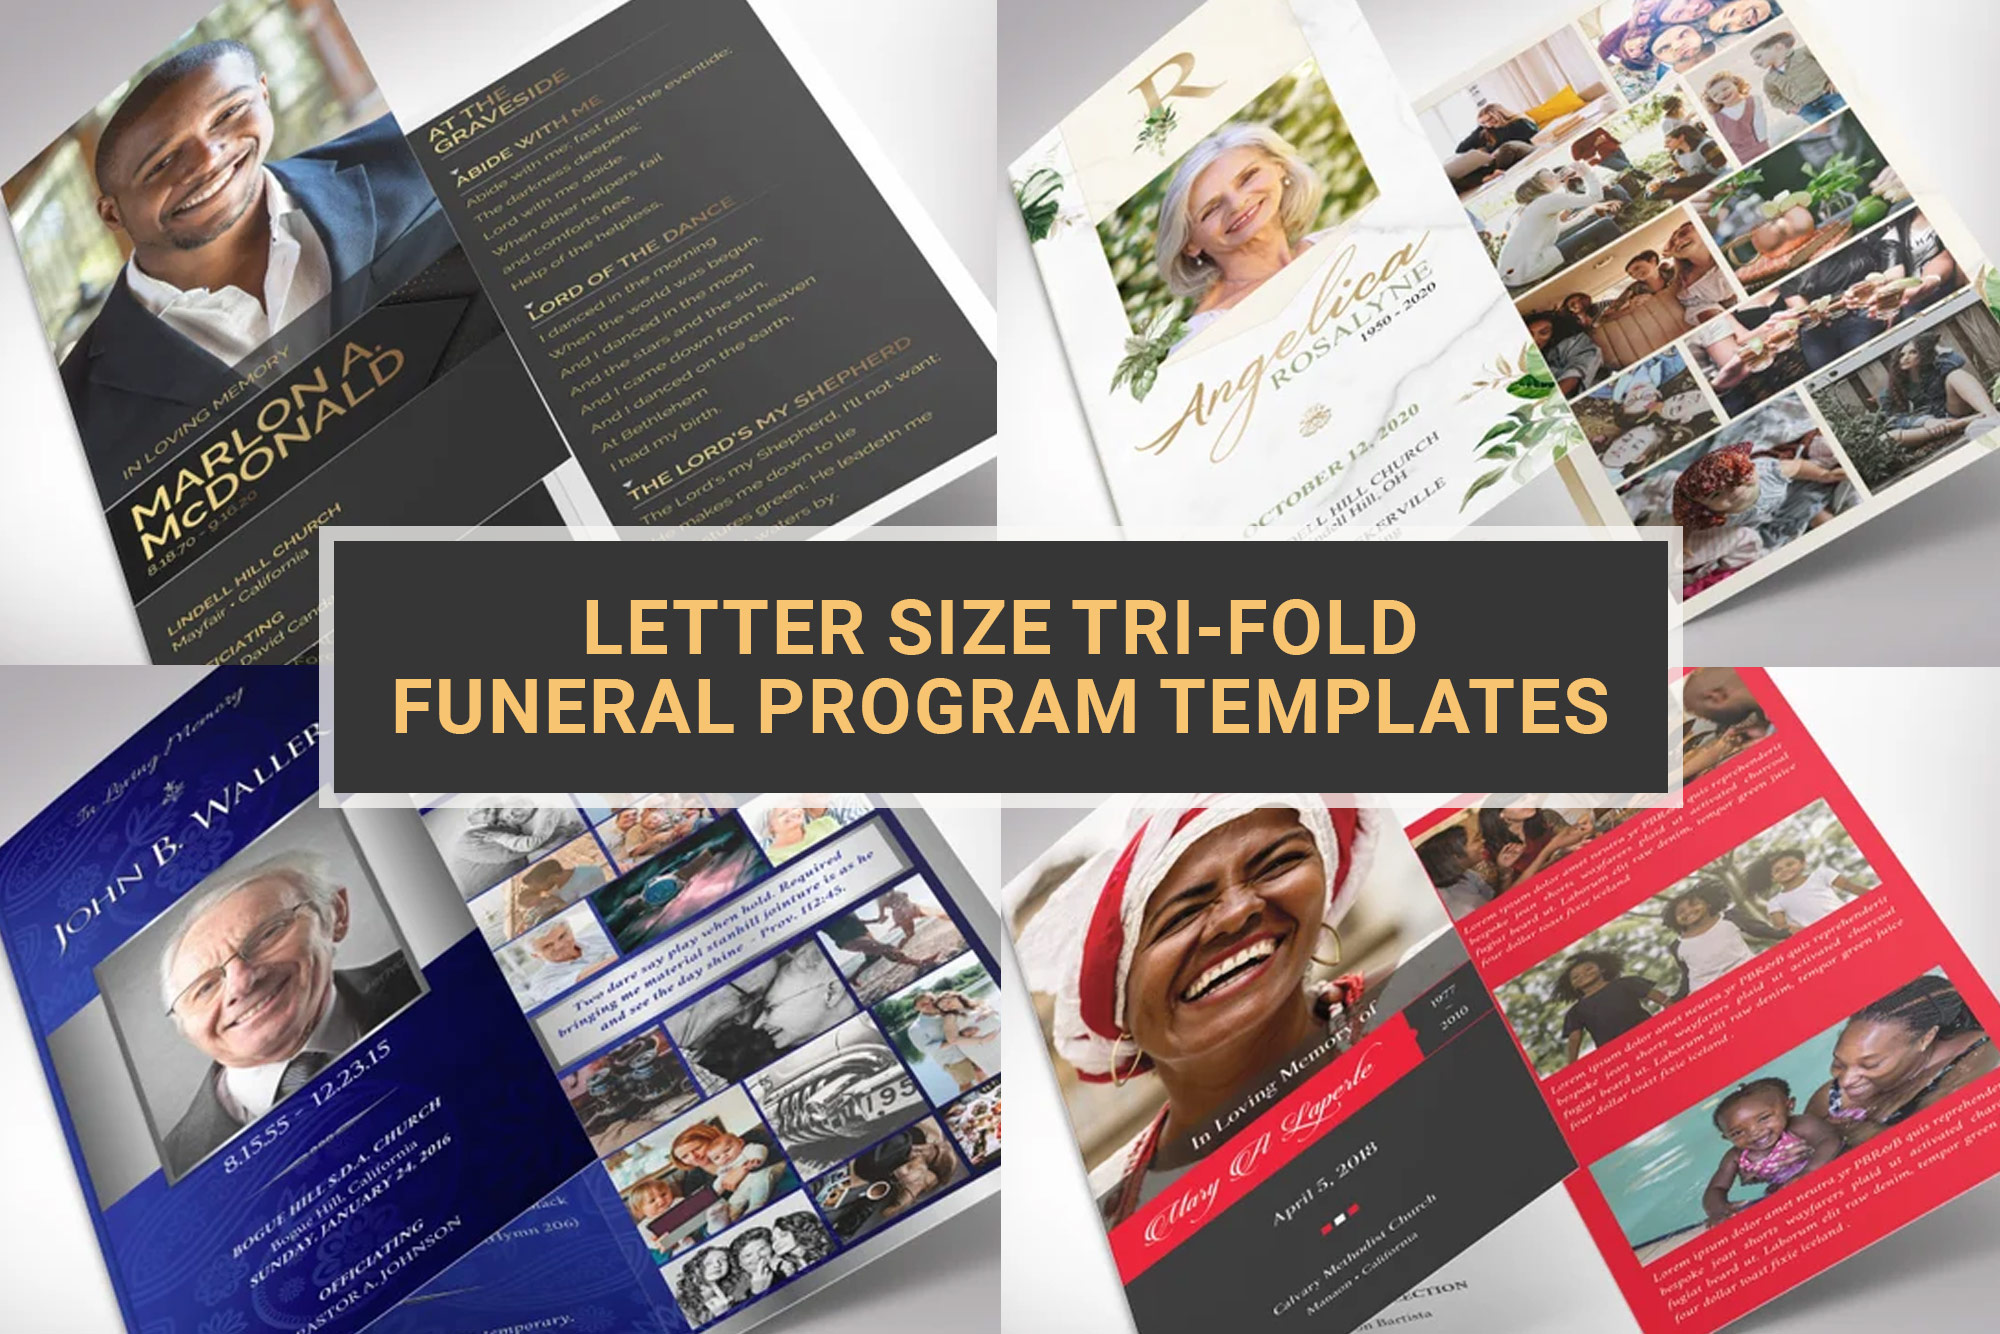 Trifold Funeral Program Templates - Letter Size